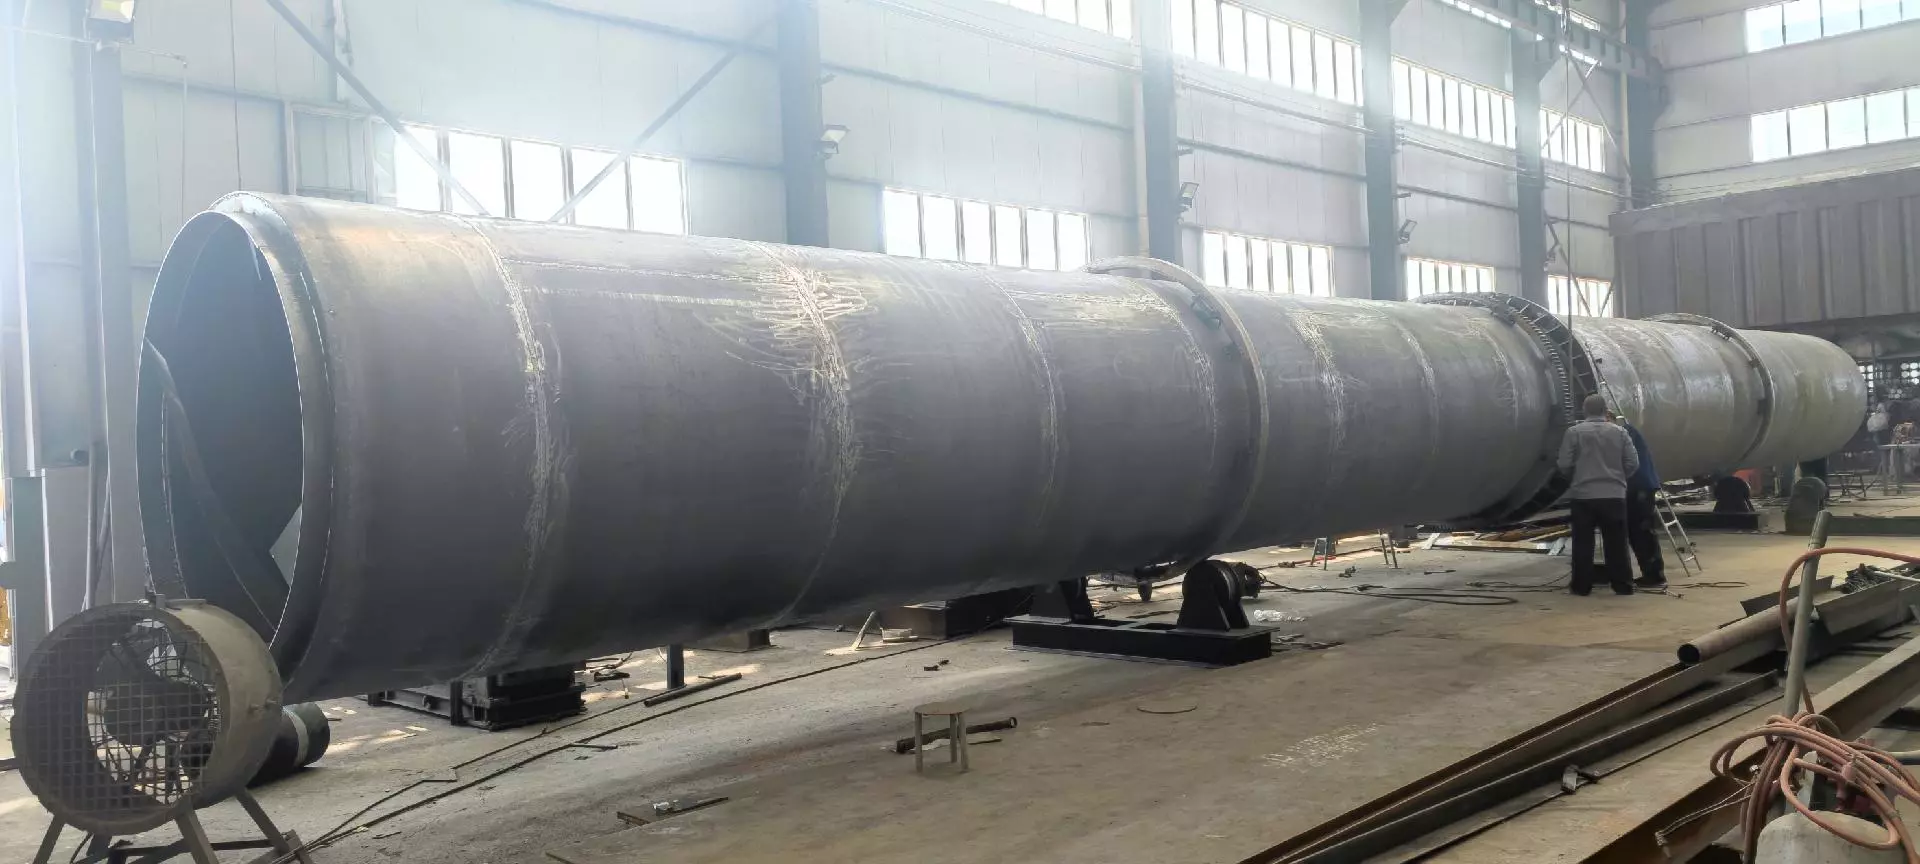 rotary dryer machine manufacturing in our factory